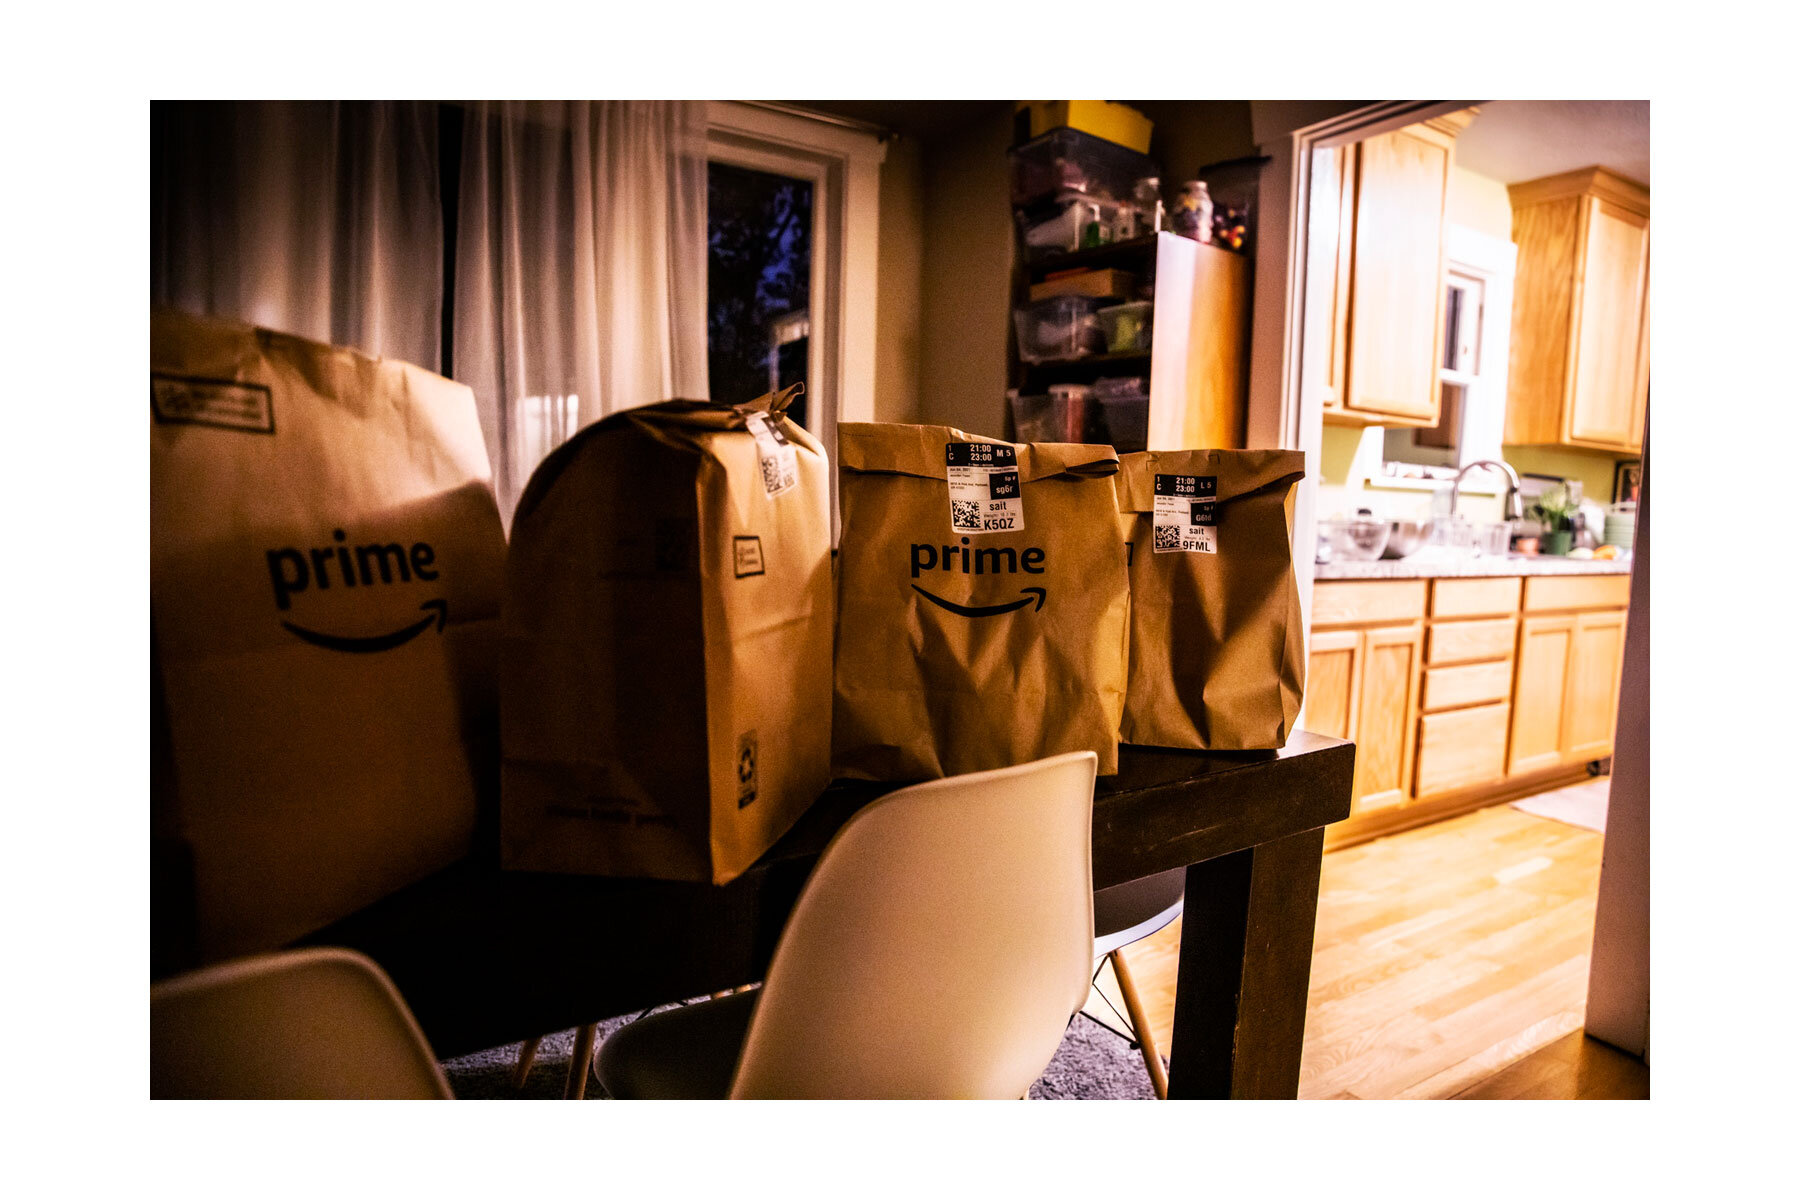 Groceries delivered at 9pm wait to be unpacked. 